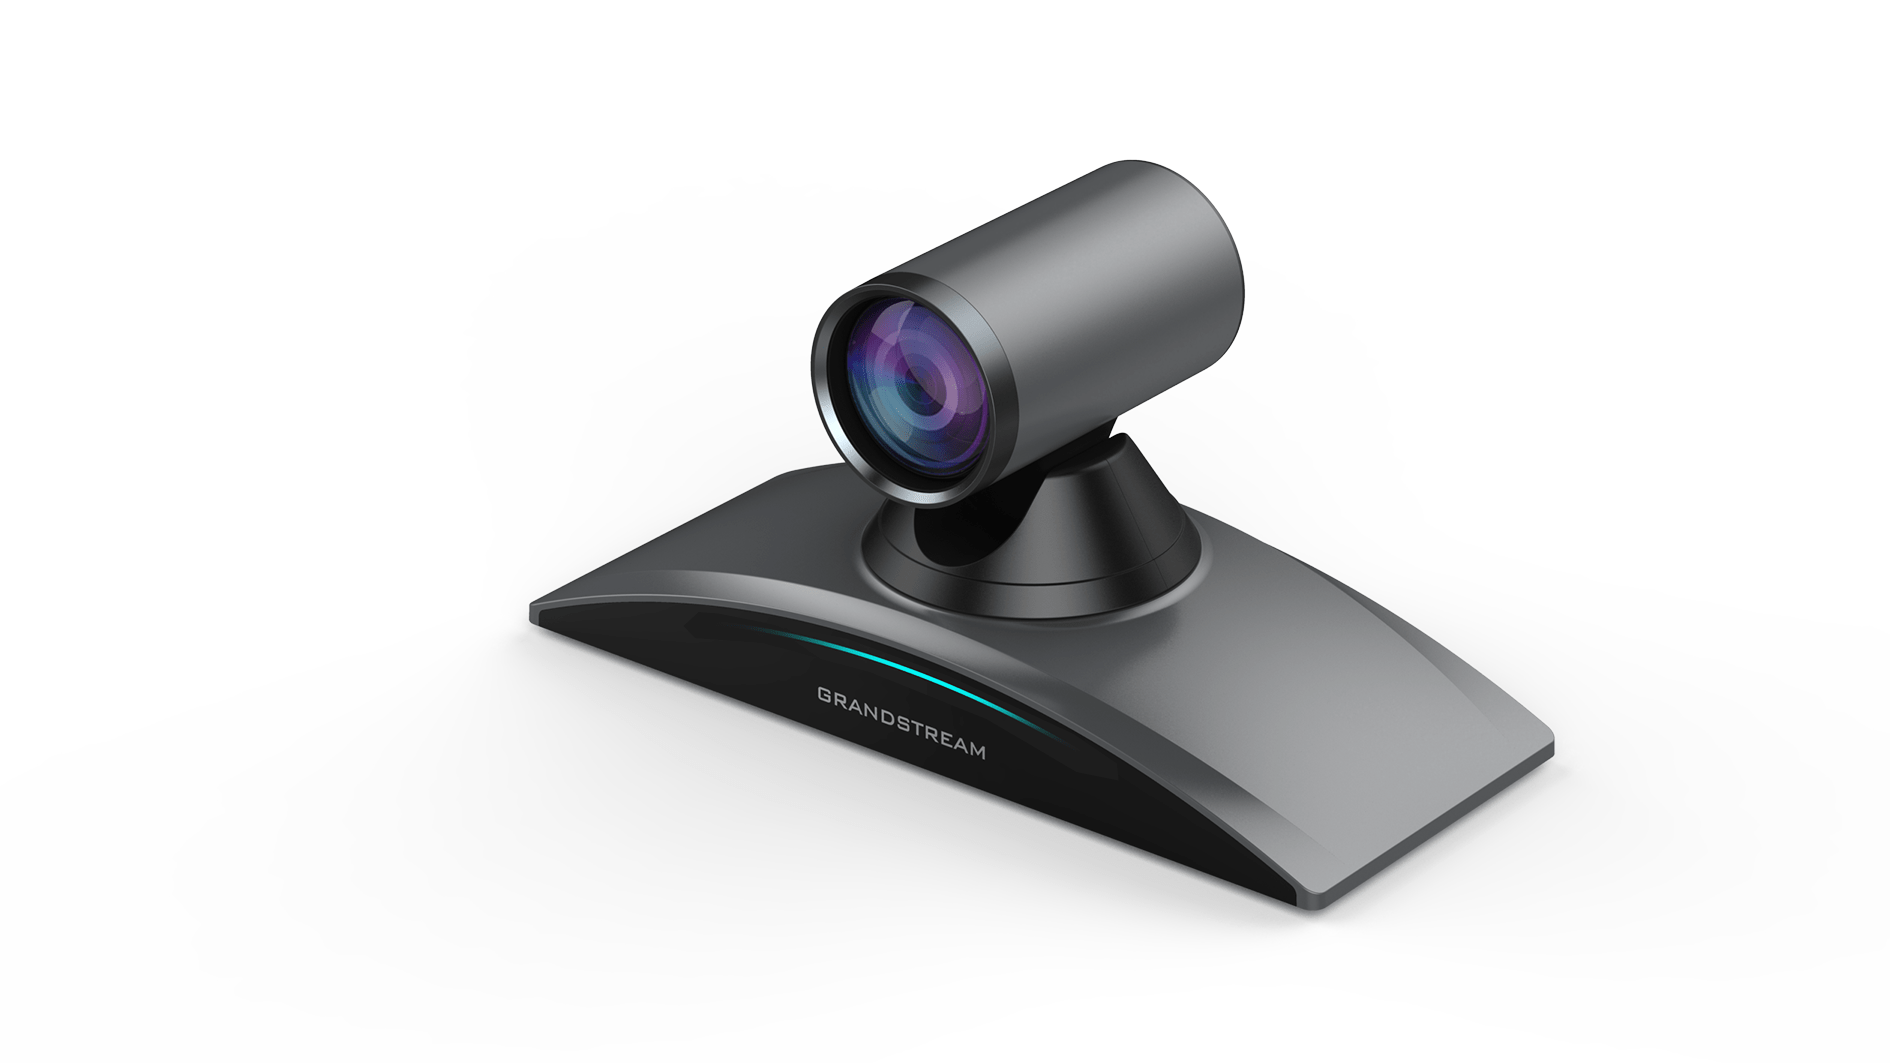 image of a high-end video conferencing system increase collaboration & productivity - grandstream